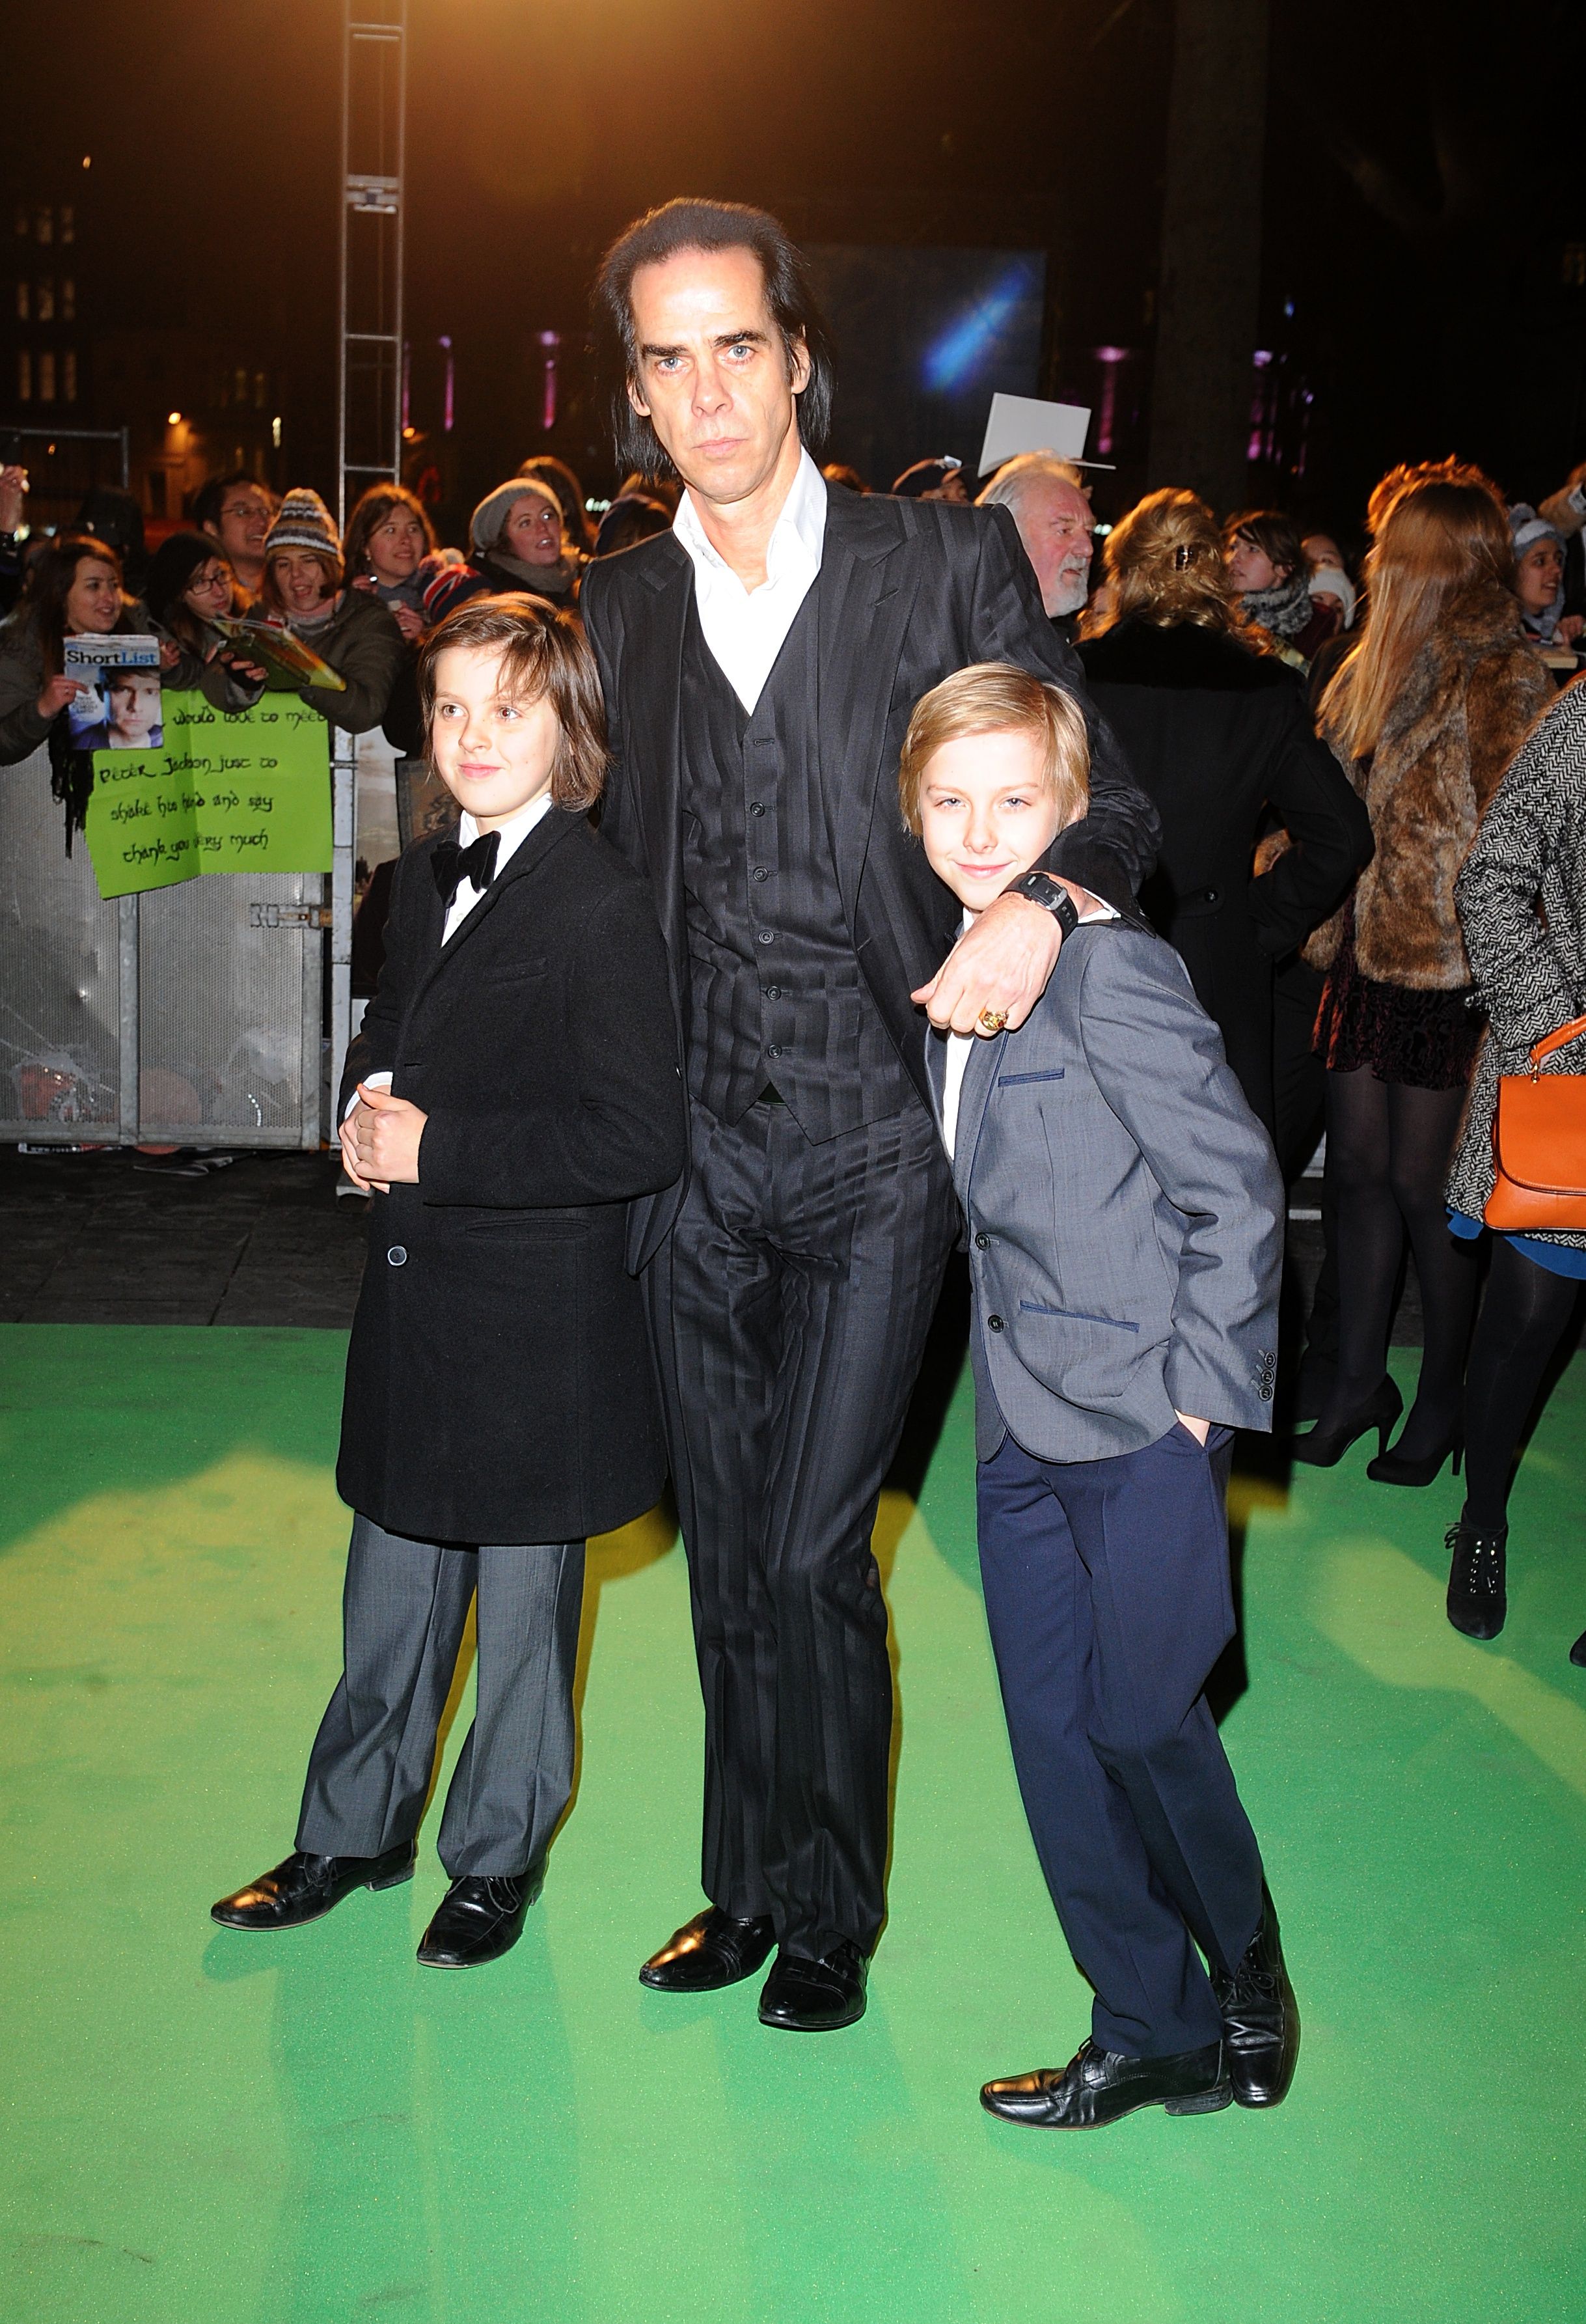 Luke and Jethro during the UK Premiere of The Hobbit: An Unexpected Journey at the Odeon Leicester Square, London. | Source: Getty Images